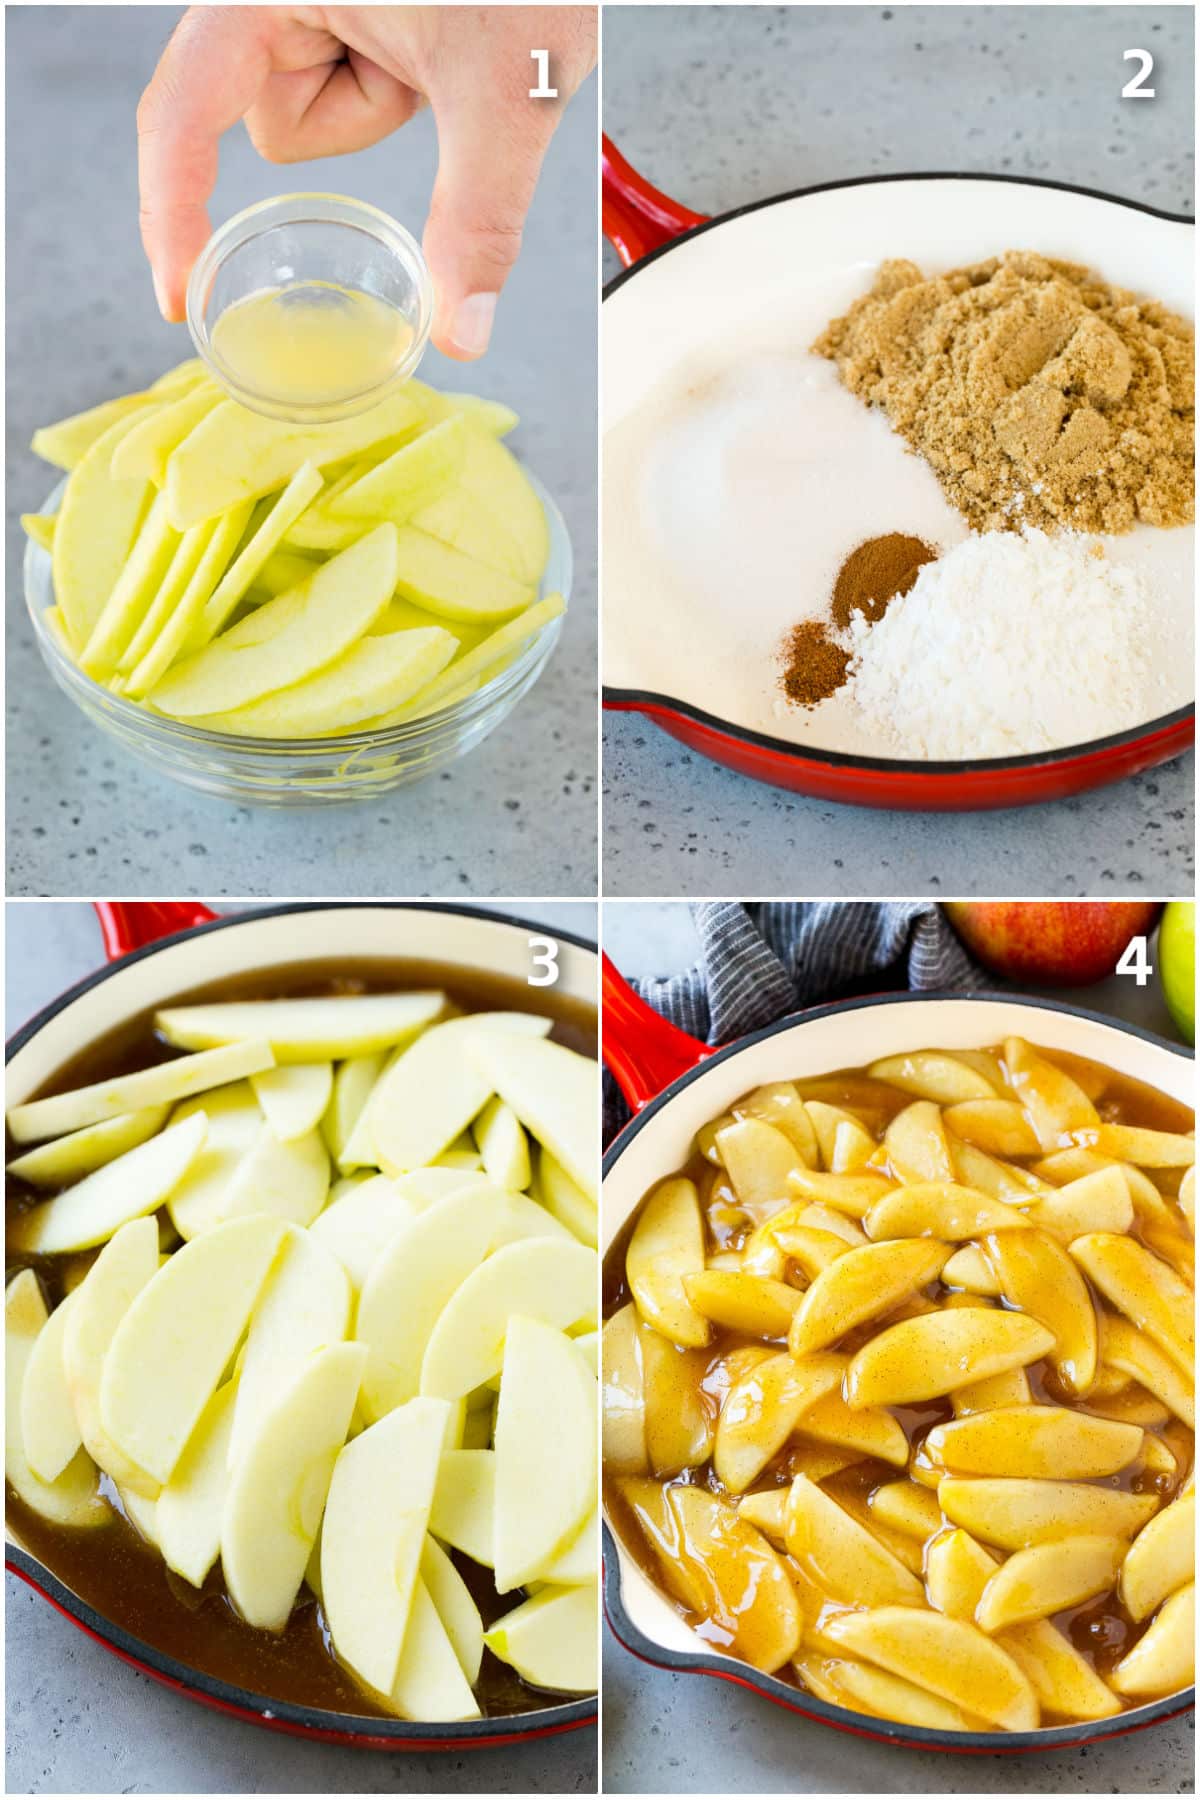 Step by step process shots showing how to make apple pie filling.